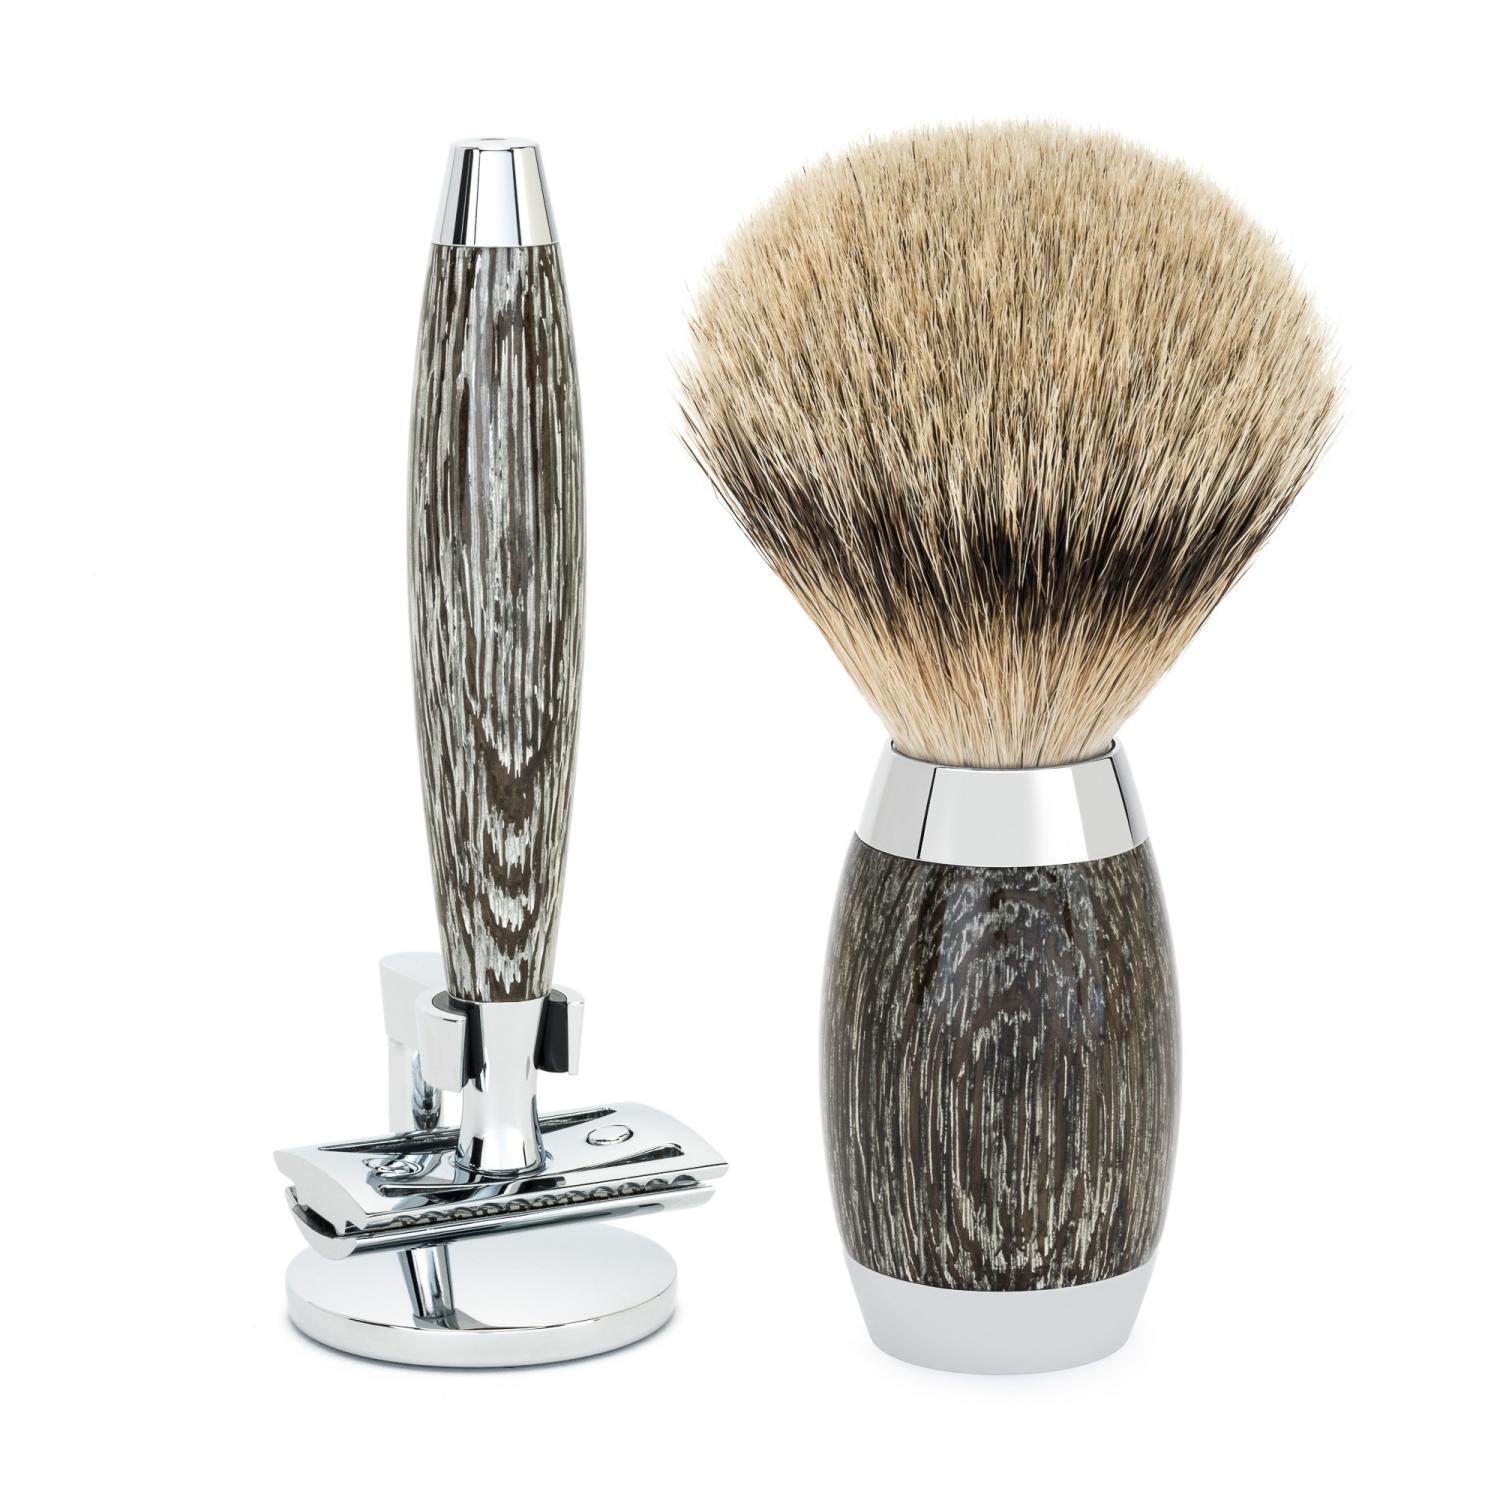 MUHLE EDITION Ancient Oak and Silver Handle Shaving Set